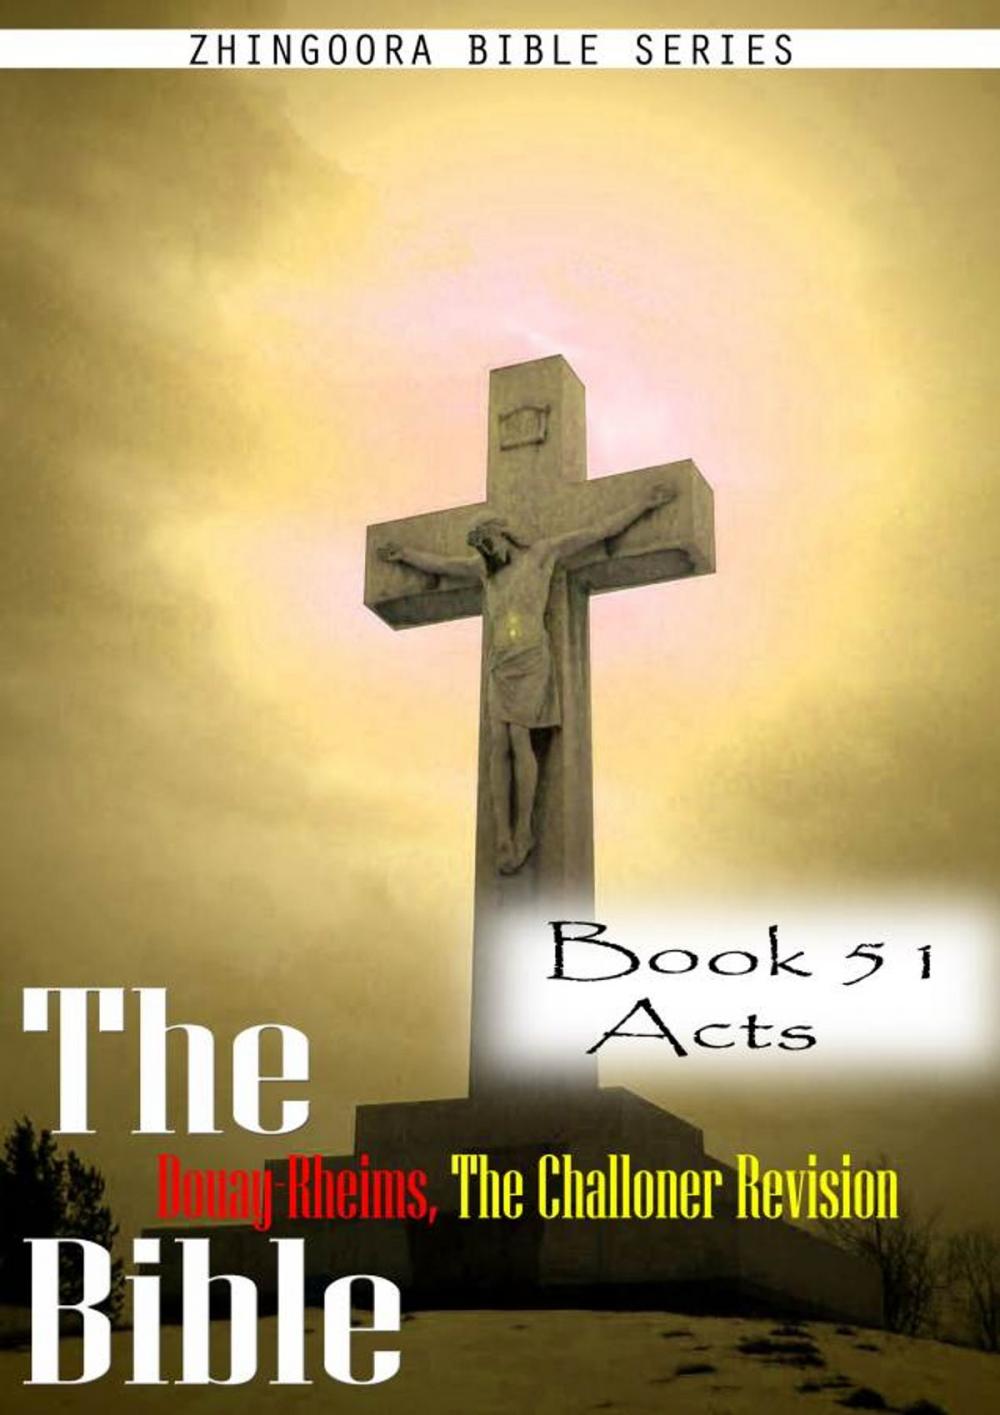 Big bigCover of The Bible Douay-Rheims, the Challoner Revision,Book 51 Acts